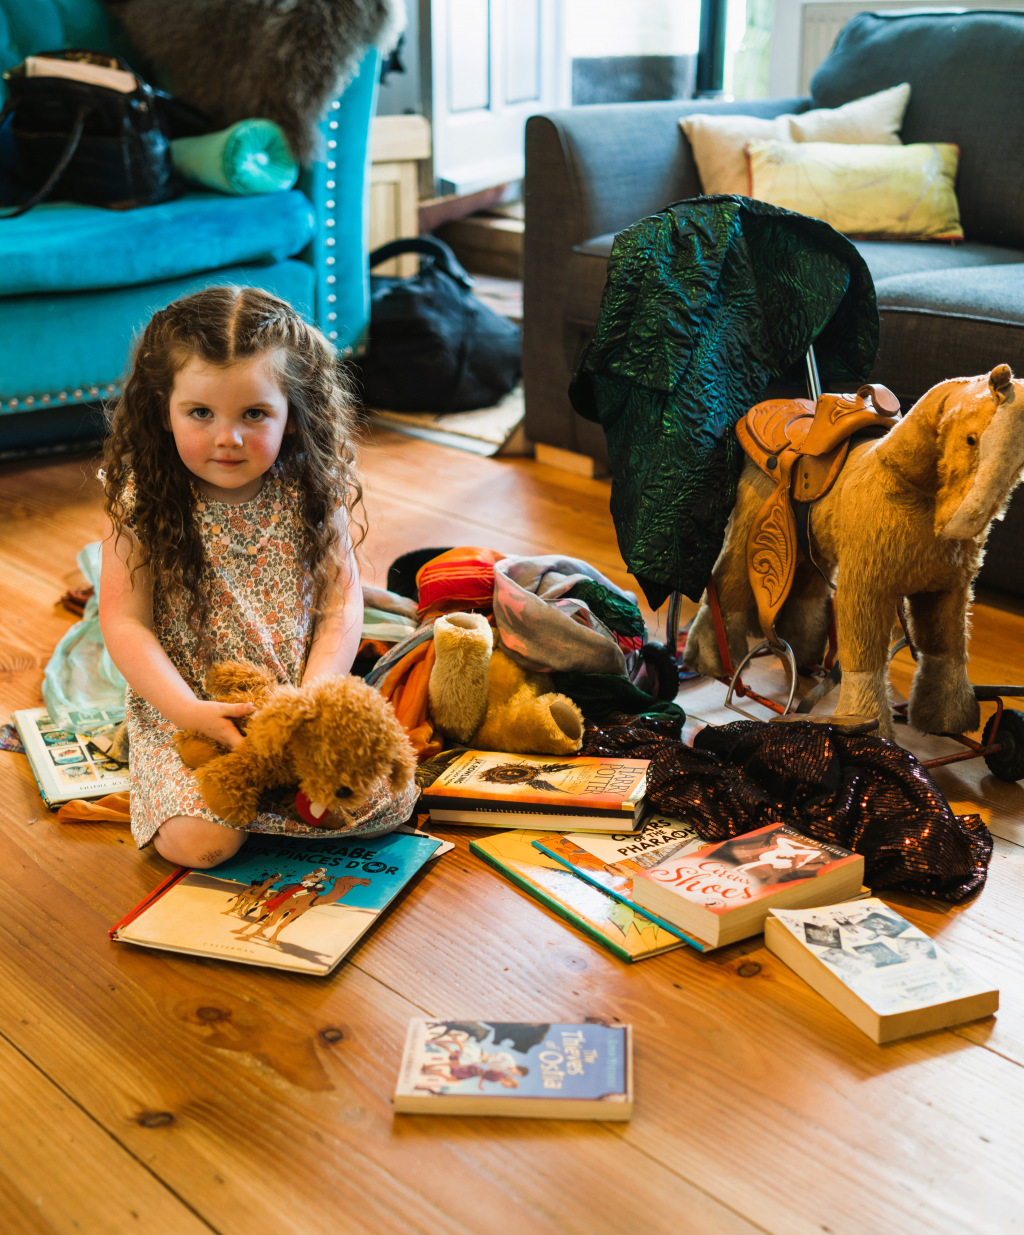 Little girl with books and toys on wooden floor